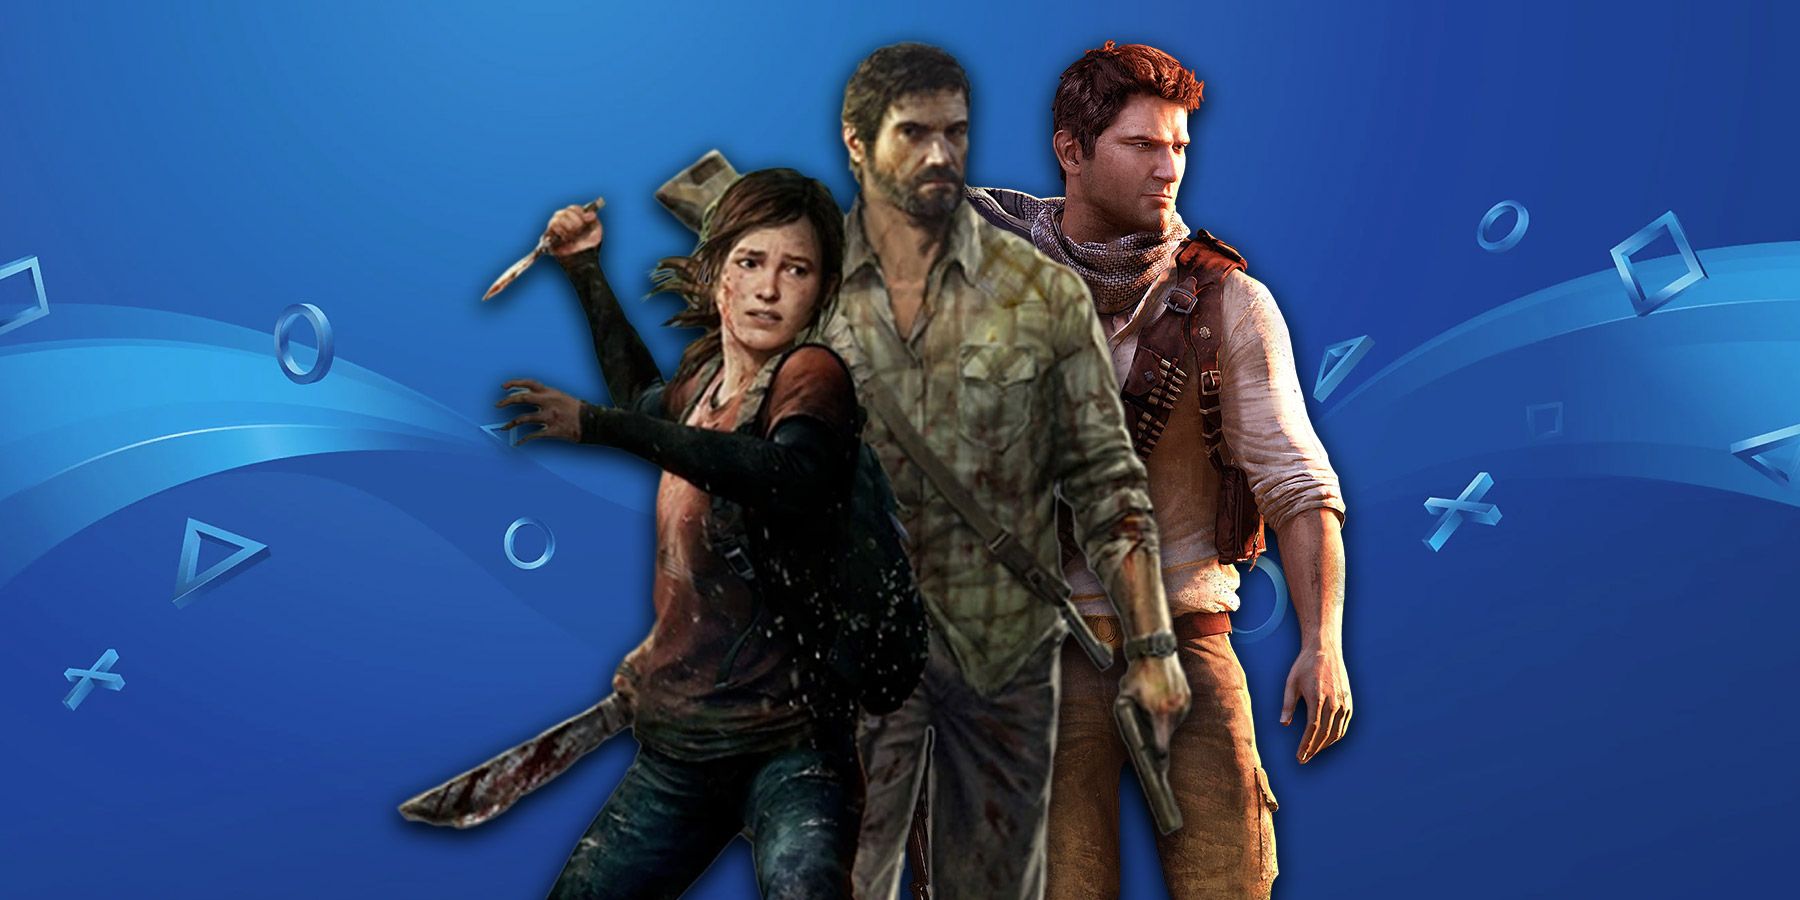 Fan Fuses The Last of Us' Joel with Uncharted's Nathan Drake